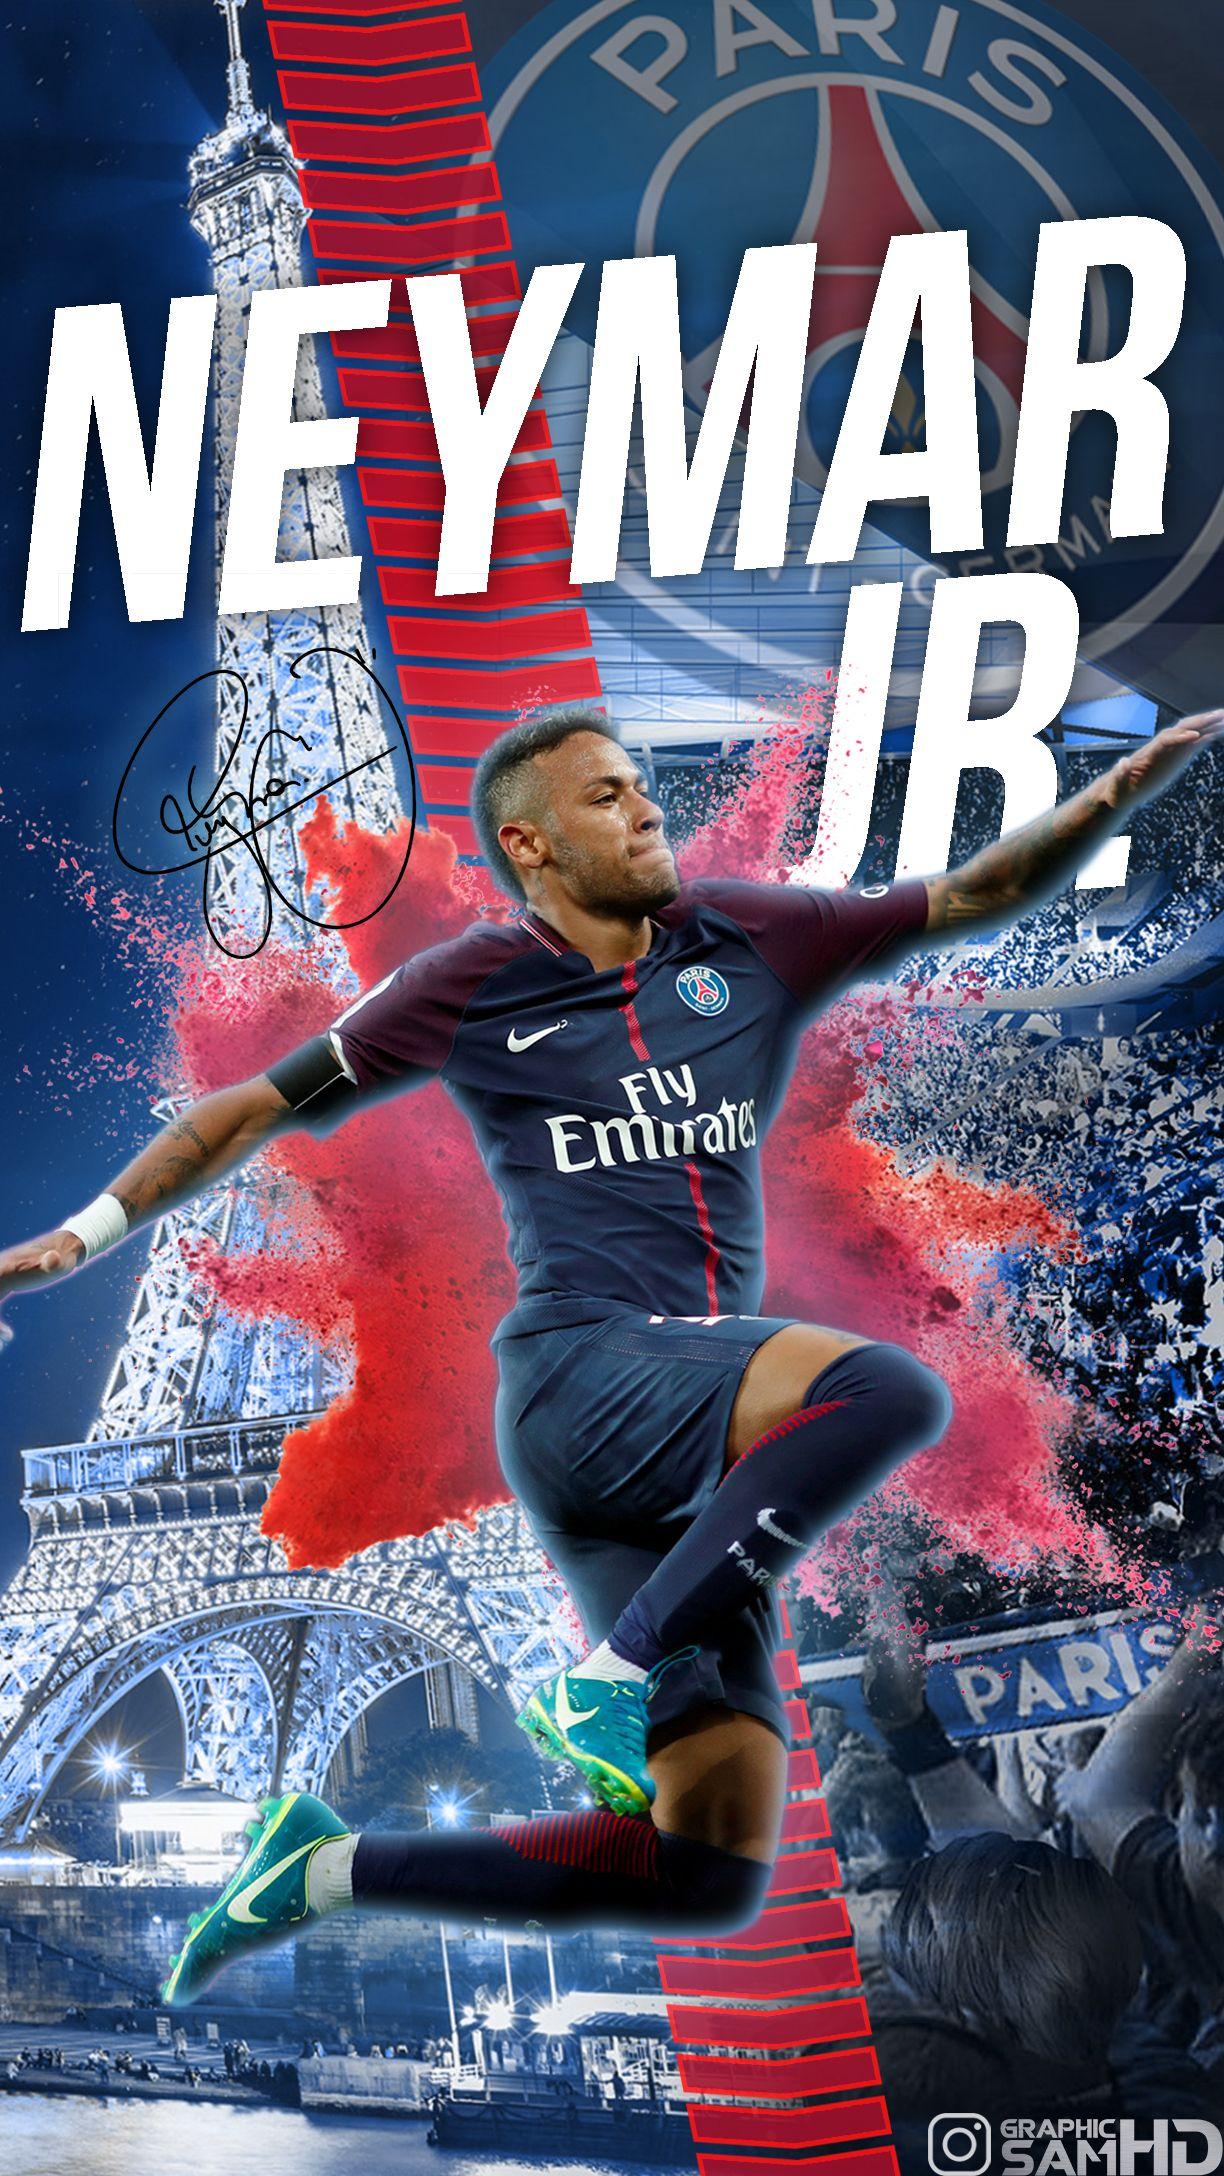 Fico 16 Fatti Su Neymar Wallpaper Psg 2021 You Can Make Neymar Psg Wallpaper 1080p For Your Desktop Computer Backgrounds Mac Wallpapers Android Lock Screen Or Iphone Screensavers And Another Smartphone Device